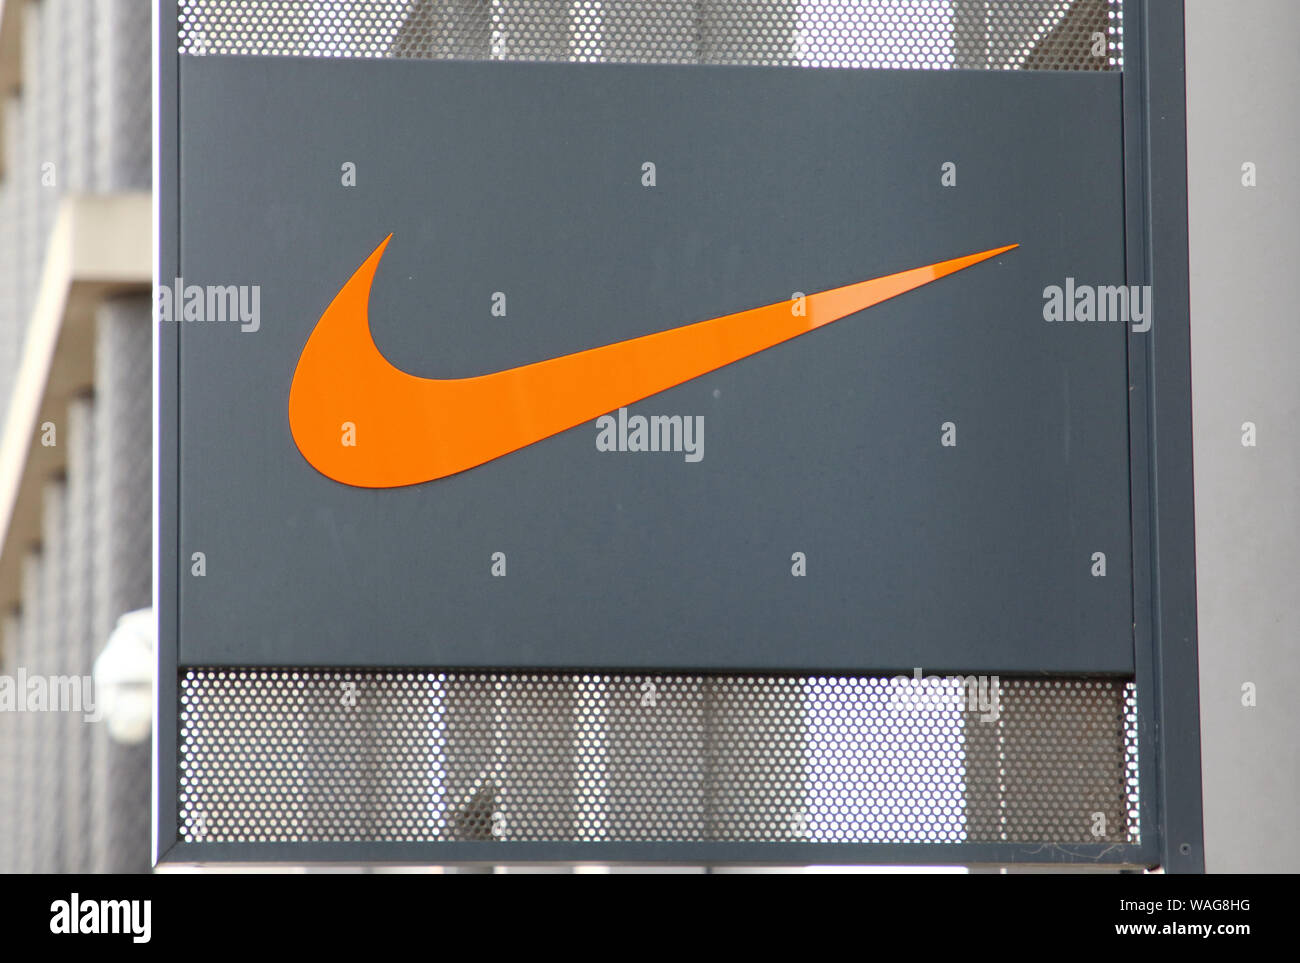 Page 2 - Nike Shop High Resolution Stock Photography and Images - Alamy